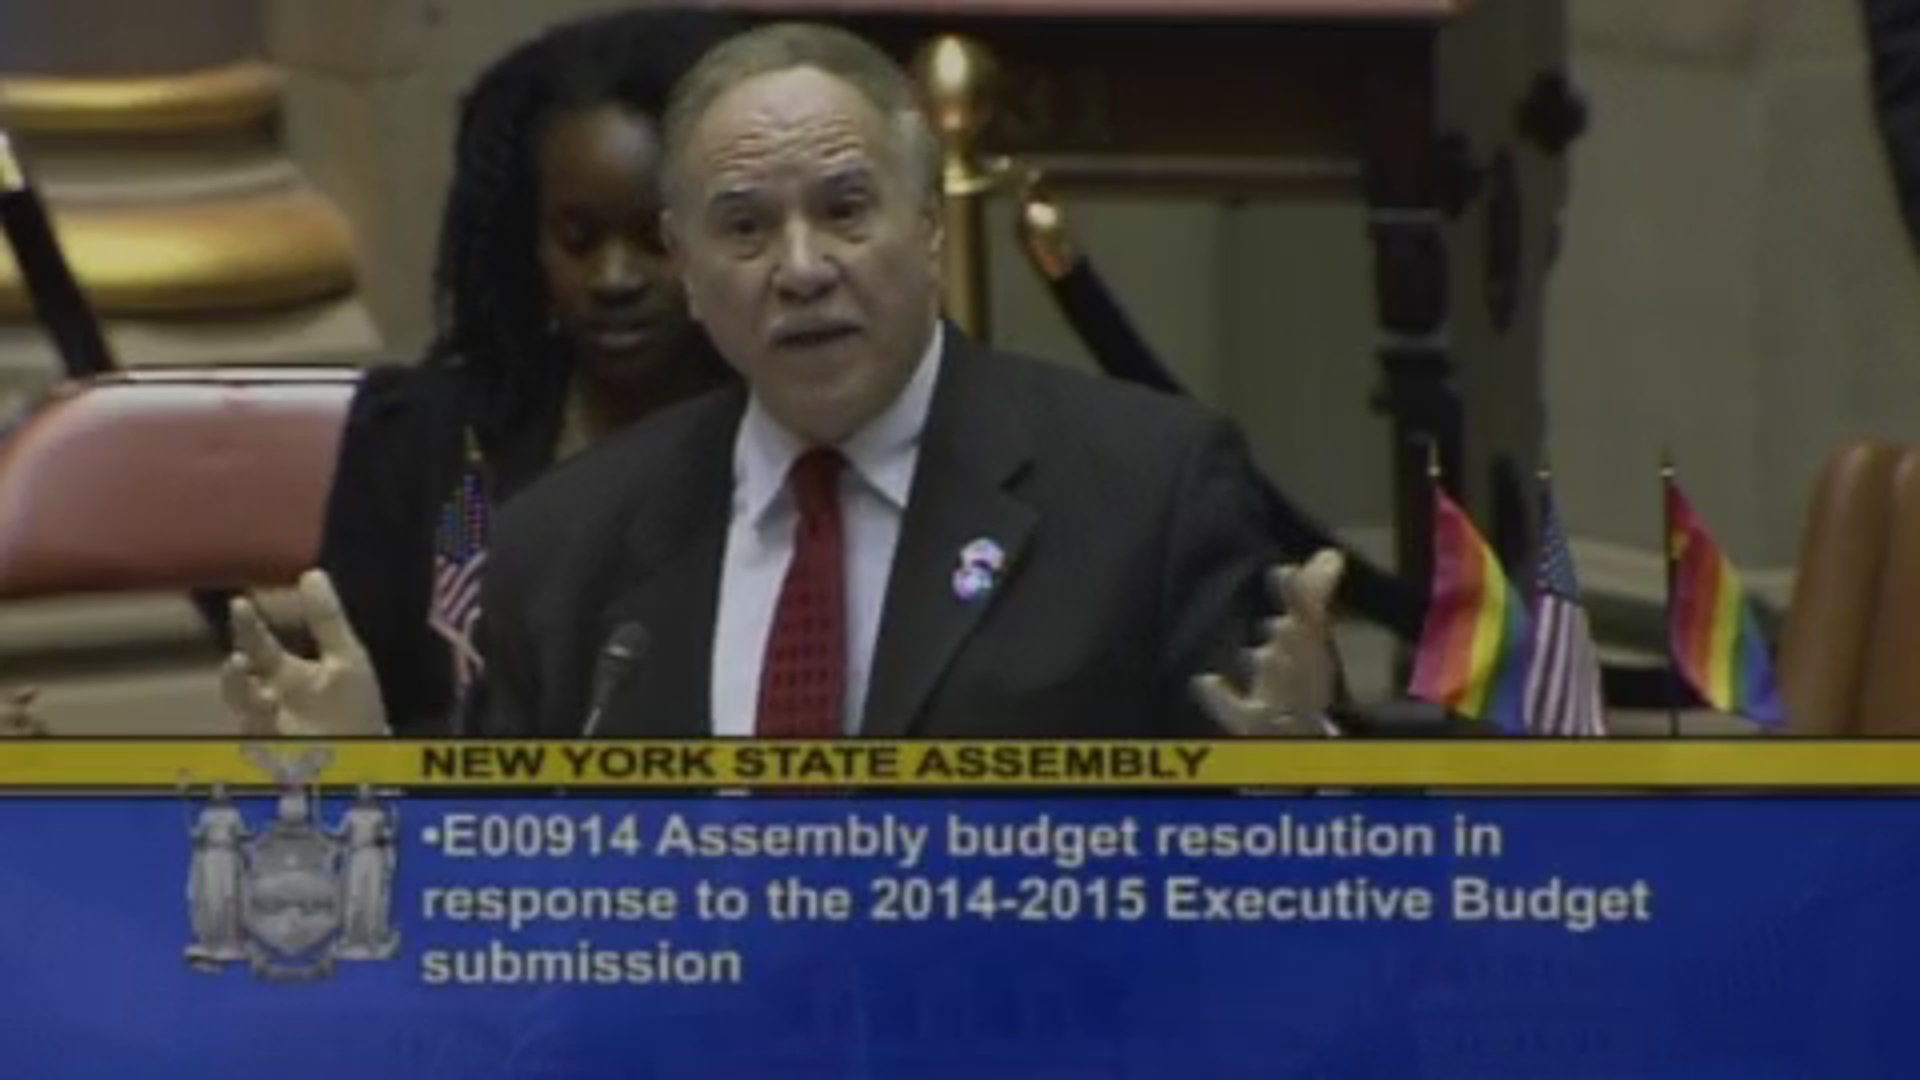 Assembly Budget Resolution